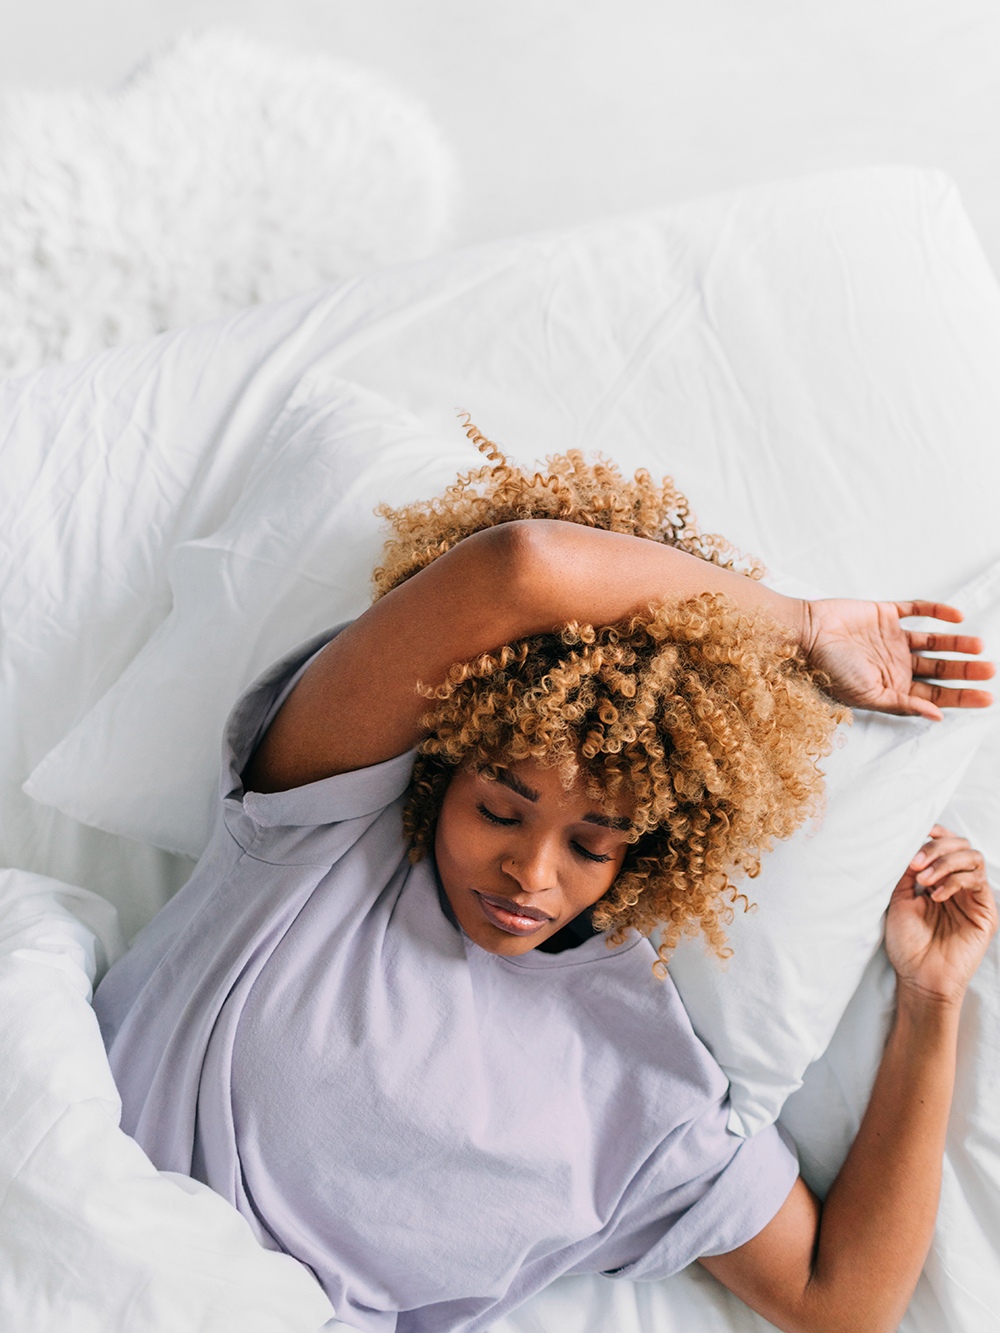 12 Natural Sleep Remedies to Try When You're Wide Awake